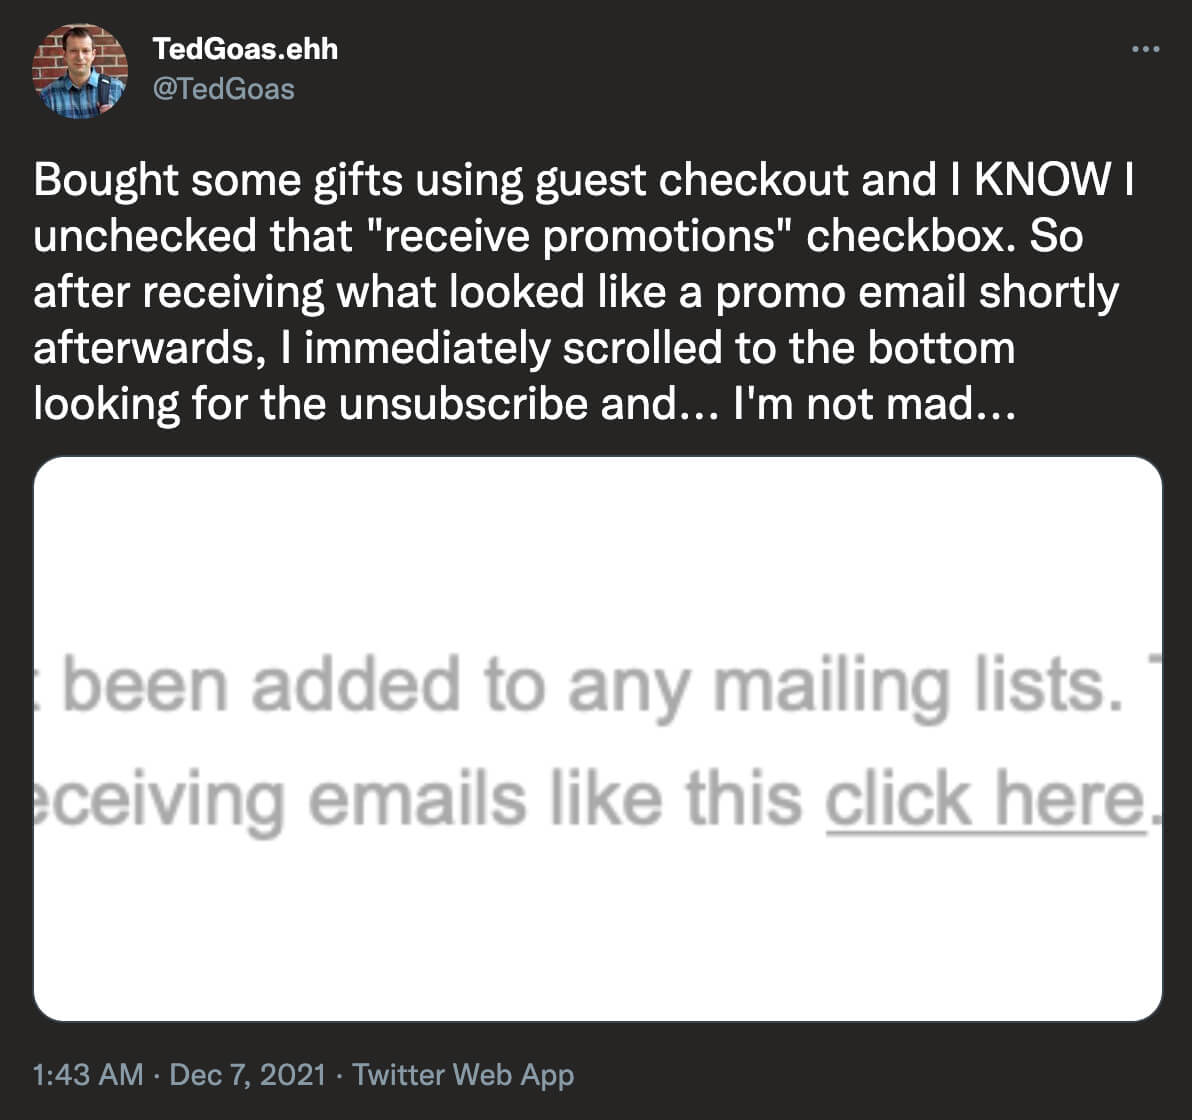 @TedGoas on Twitter: Bought some gifts using guest checkout and I KNOW I unchecked that receive promotions checkbox. So after receiving what looked like a promo email shortly afterwards, I immediately scrolled to the bottom looking for the unsubscribe and...I'm not mad... [screenshot of unsubscribe message]